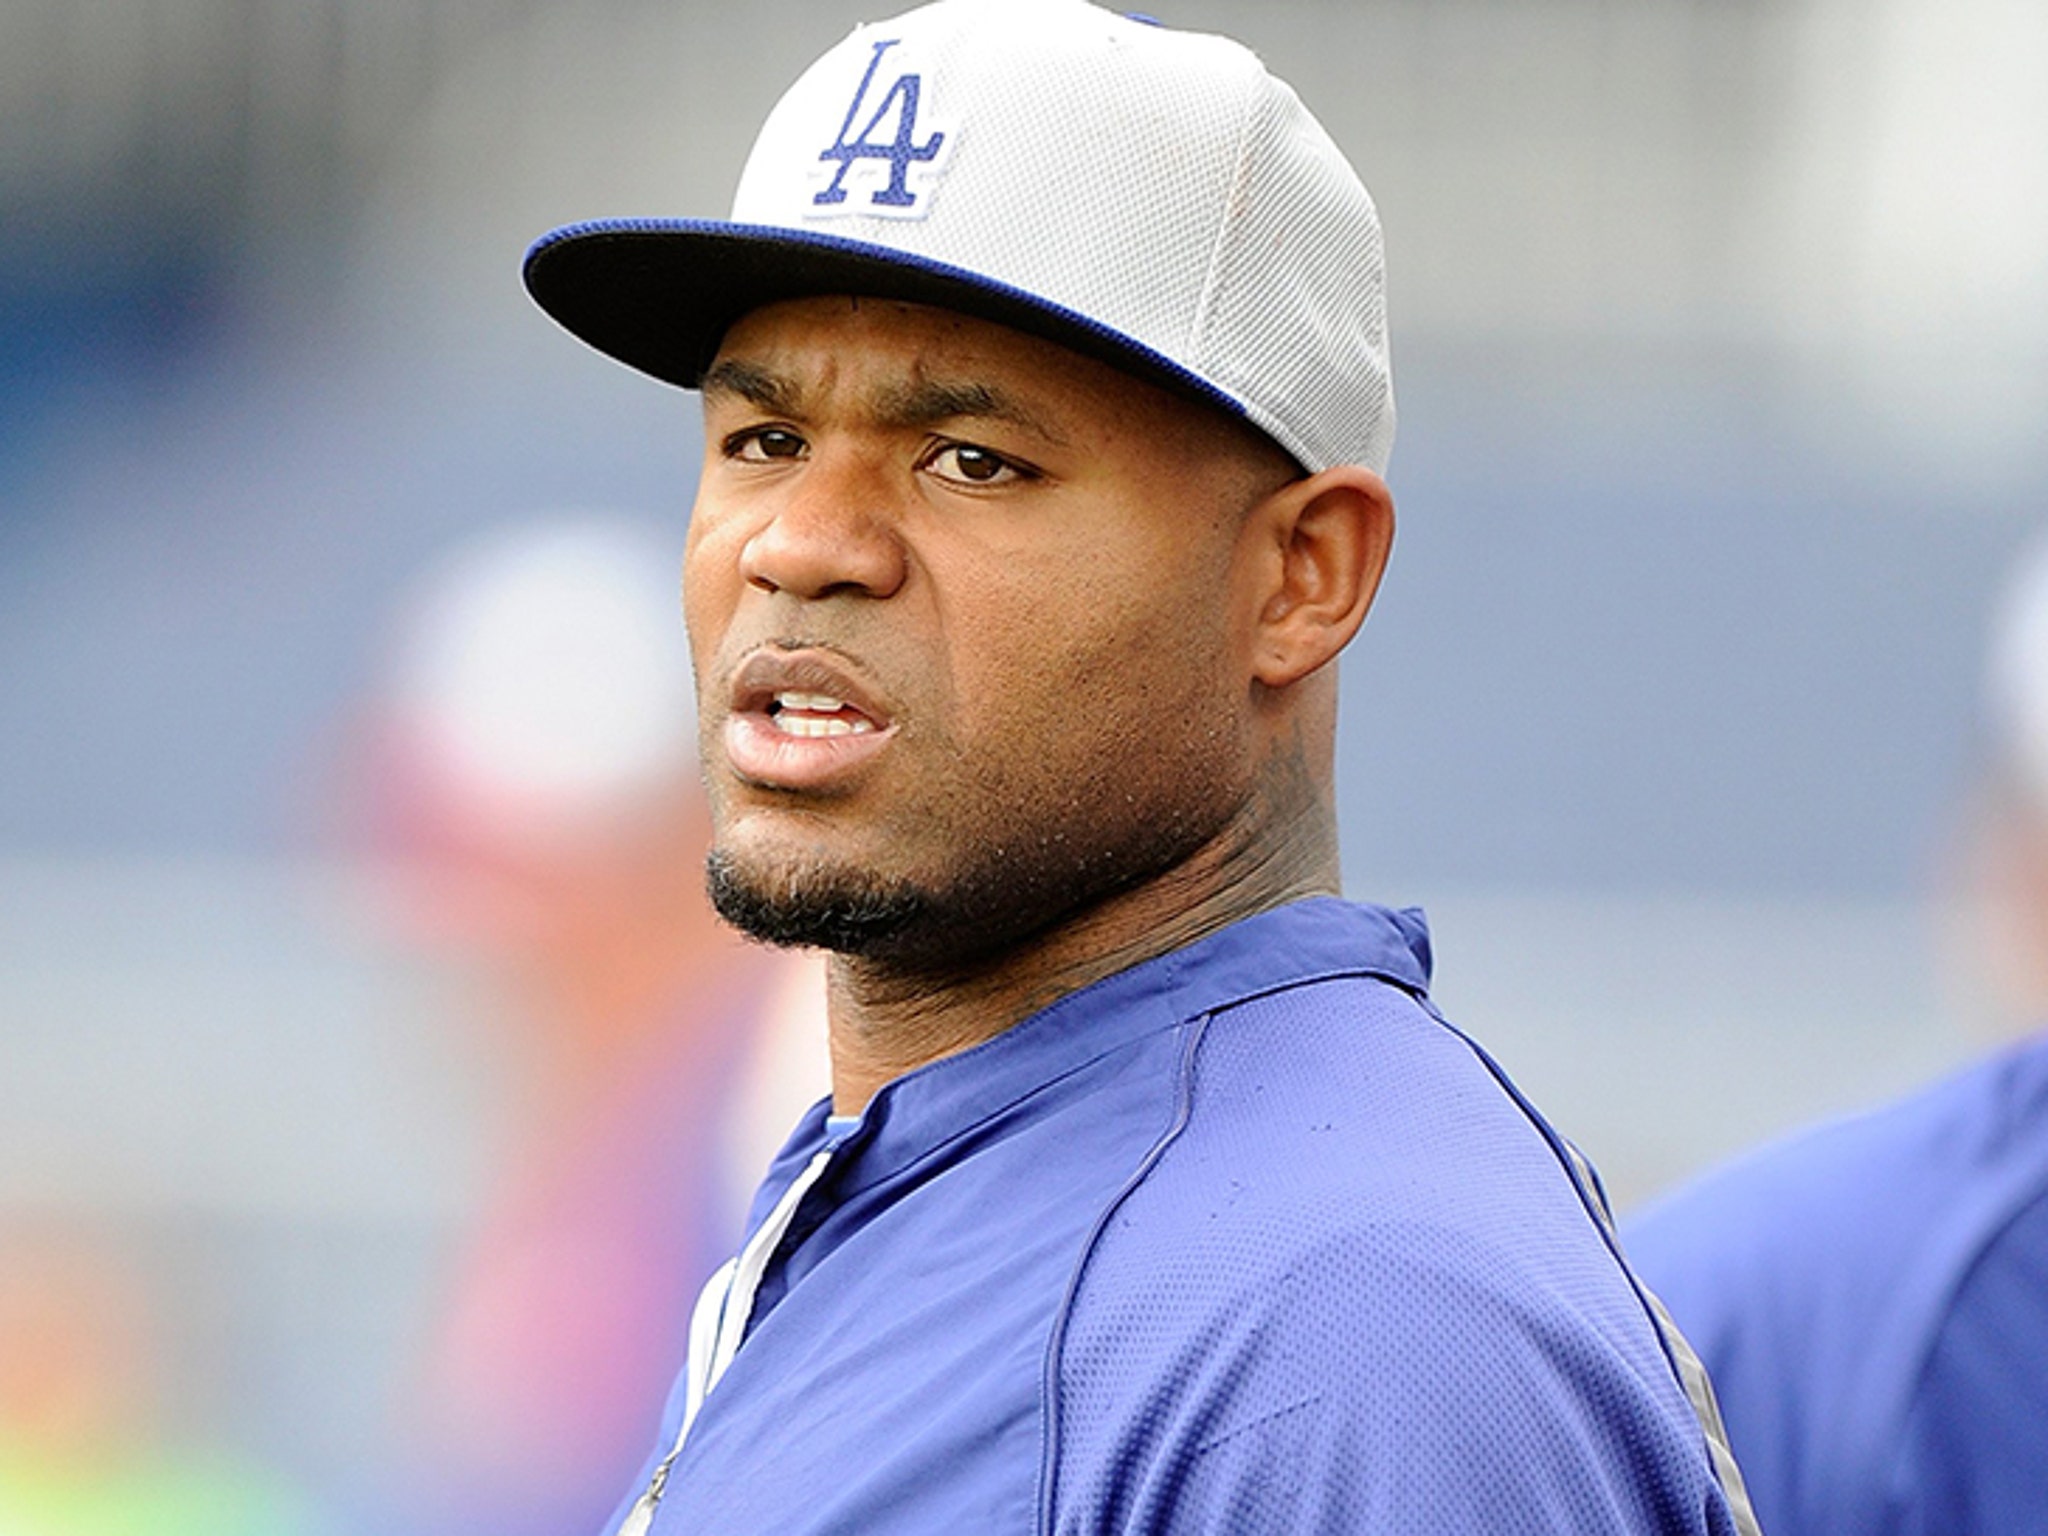 Sister of woman who 'drowned at ex-MLB star Carl Crawford's home